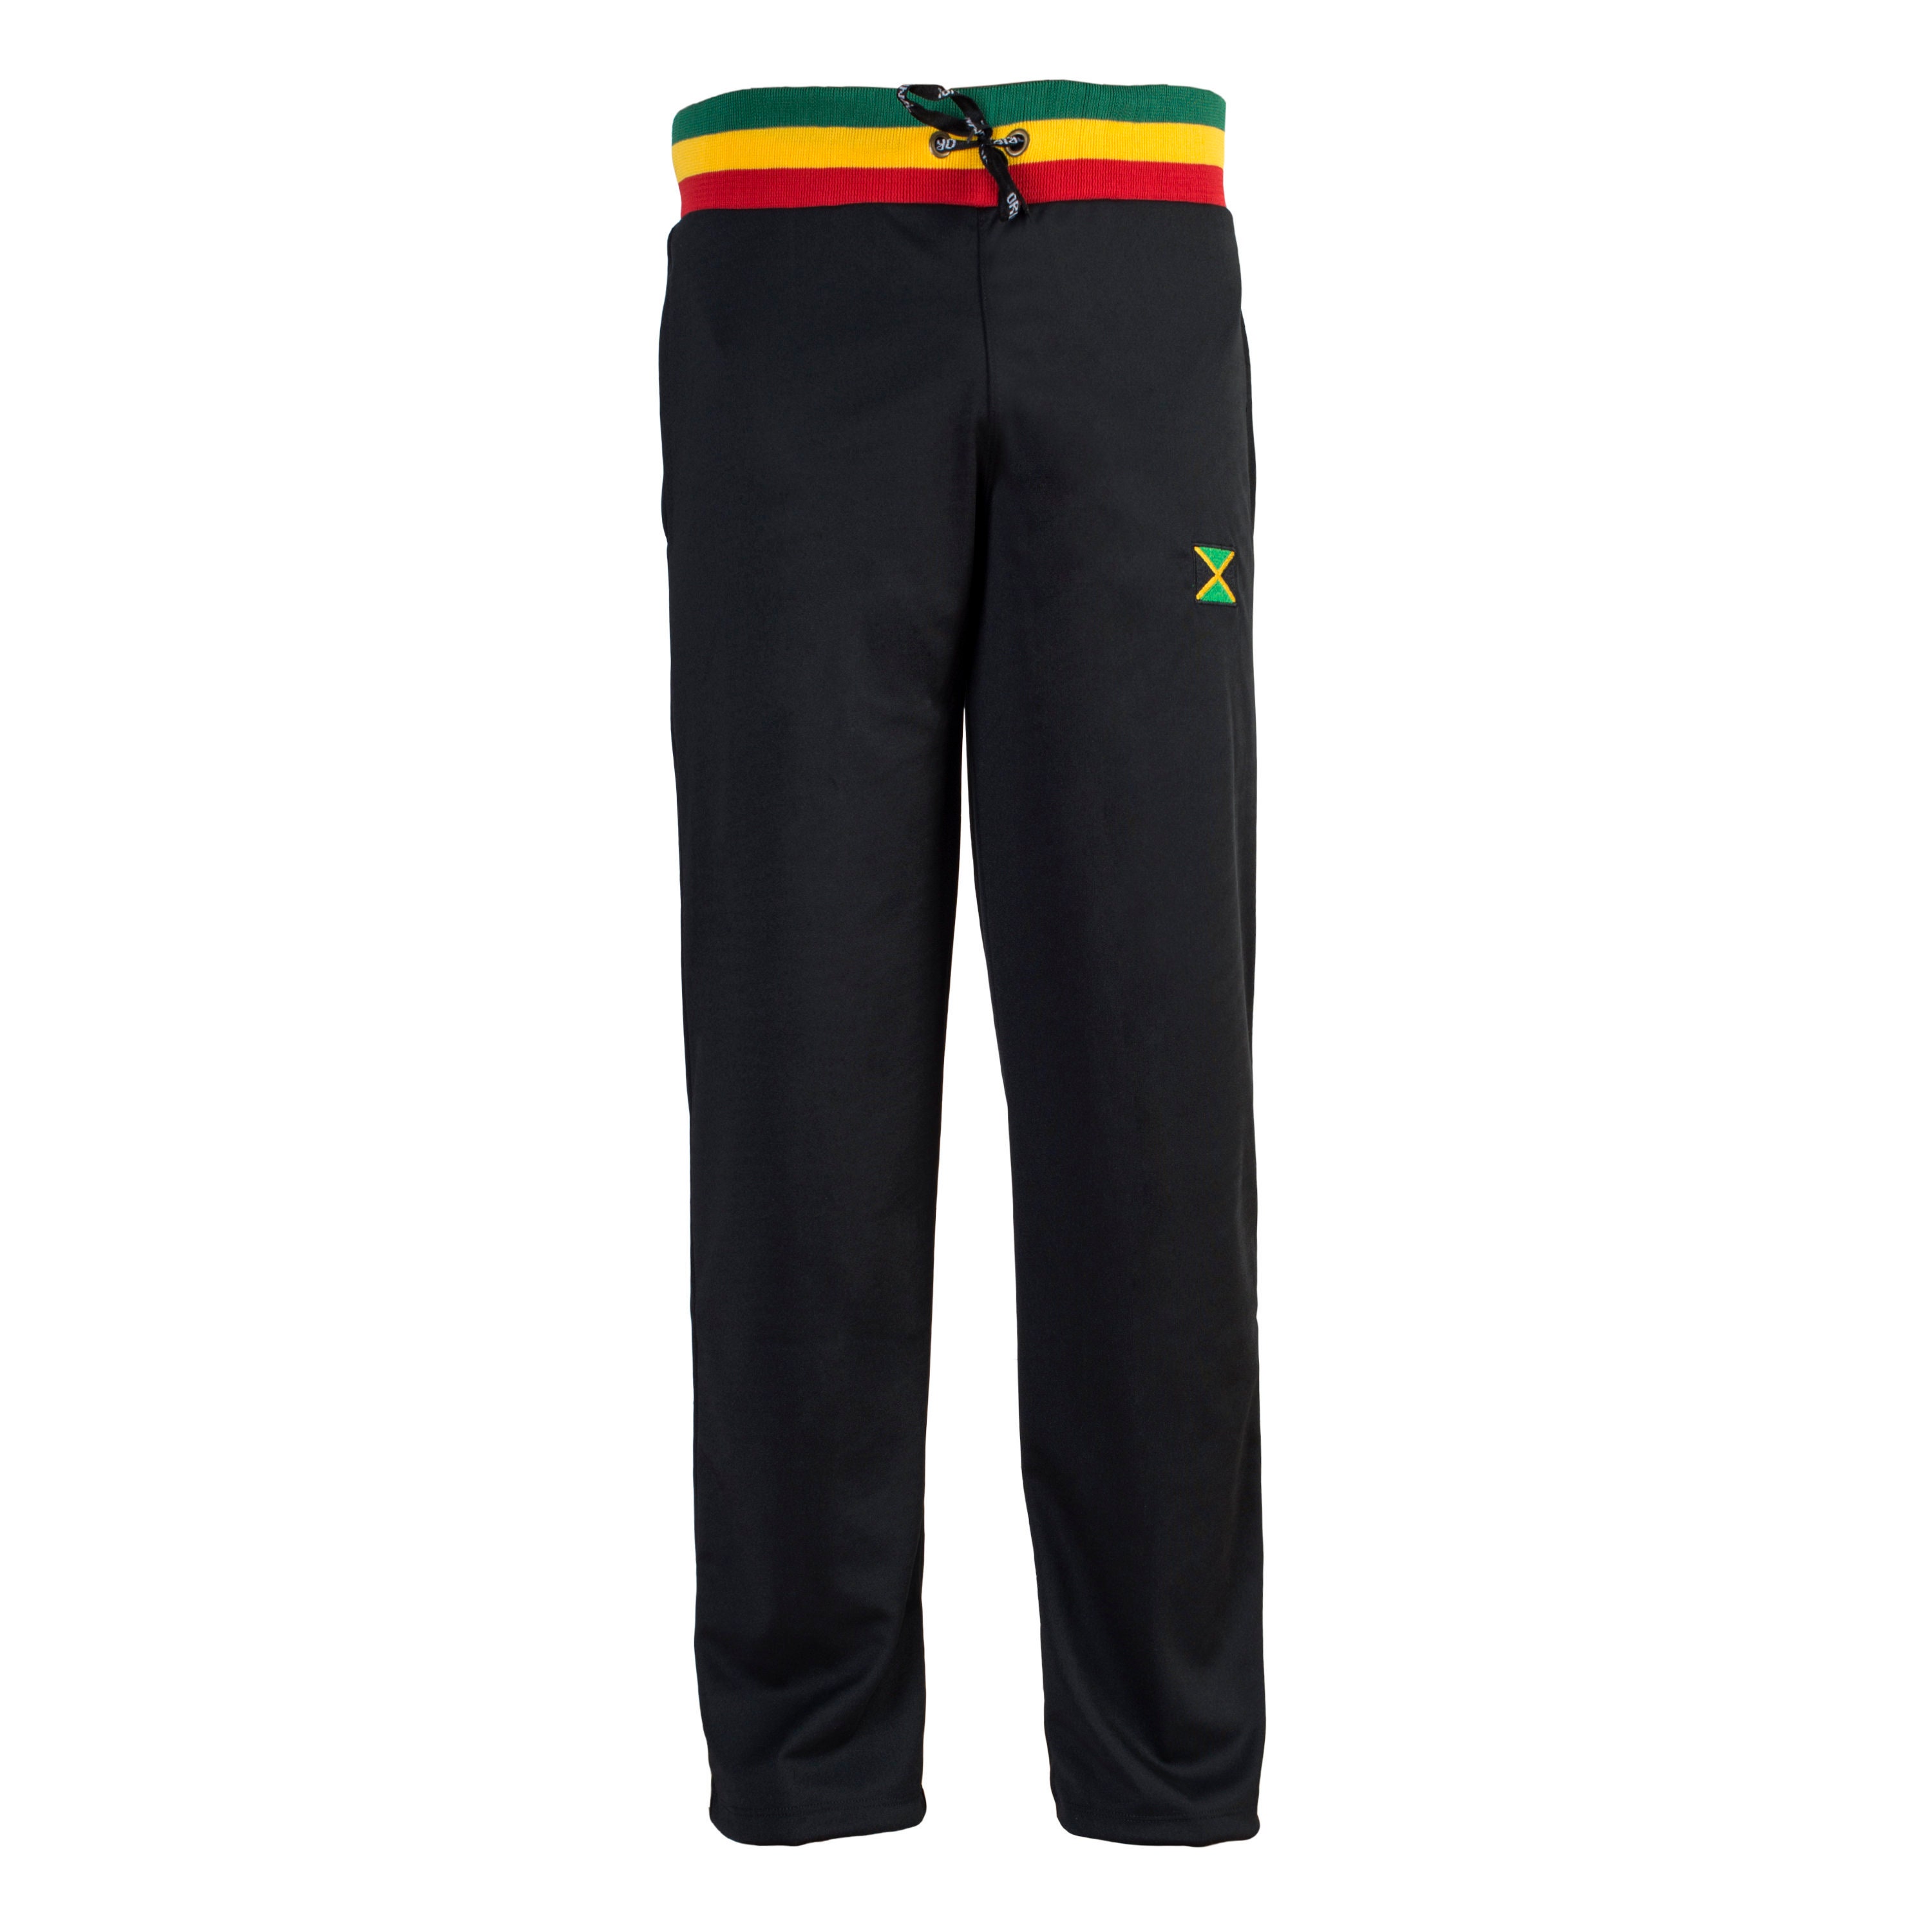 White with Brazil National Colored Vertical Leg Stripes JL Sport Authentic Brazilian Capoeira Martial Arts Mens Trousers 